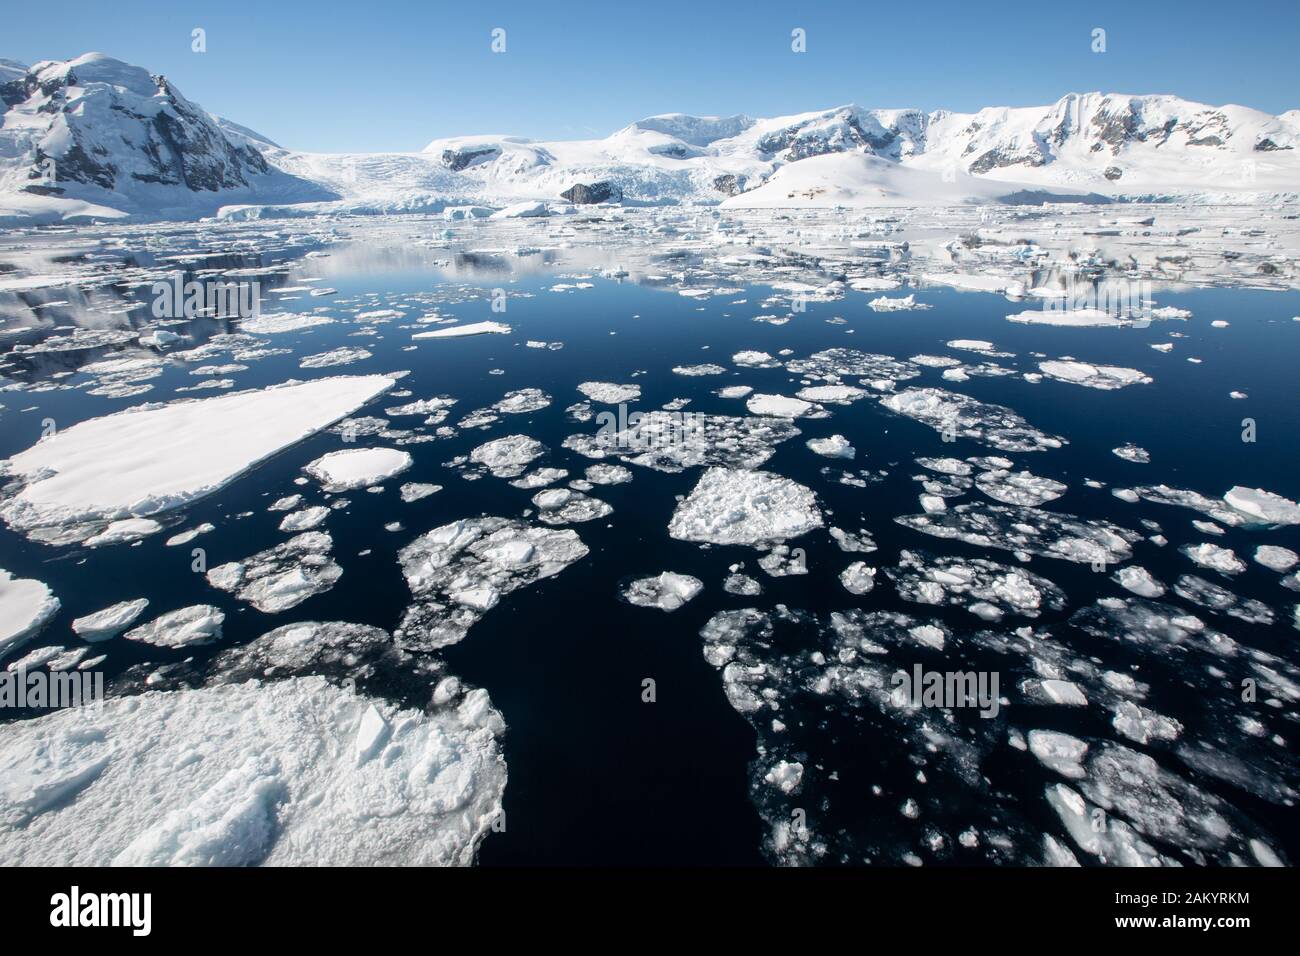 Antarctic landscape, sea, ice, glaciers and mountains reflected in the ocean on a bright sunny day Stock Photo